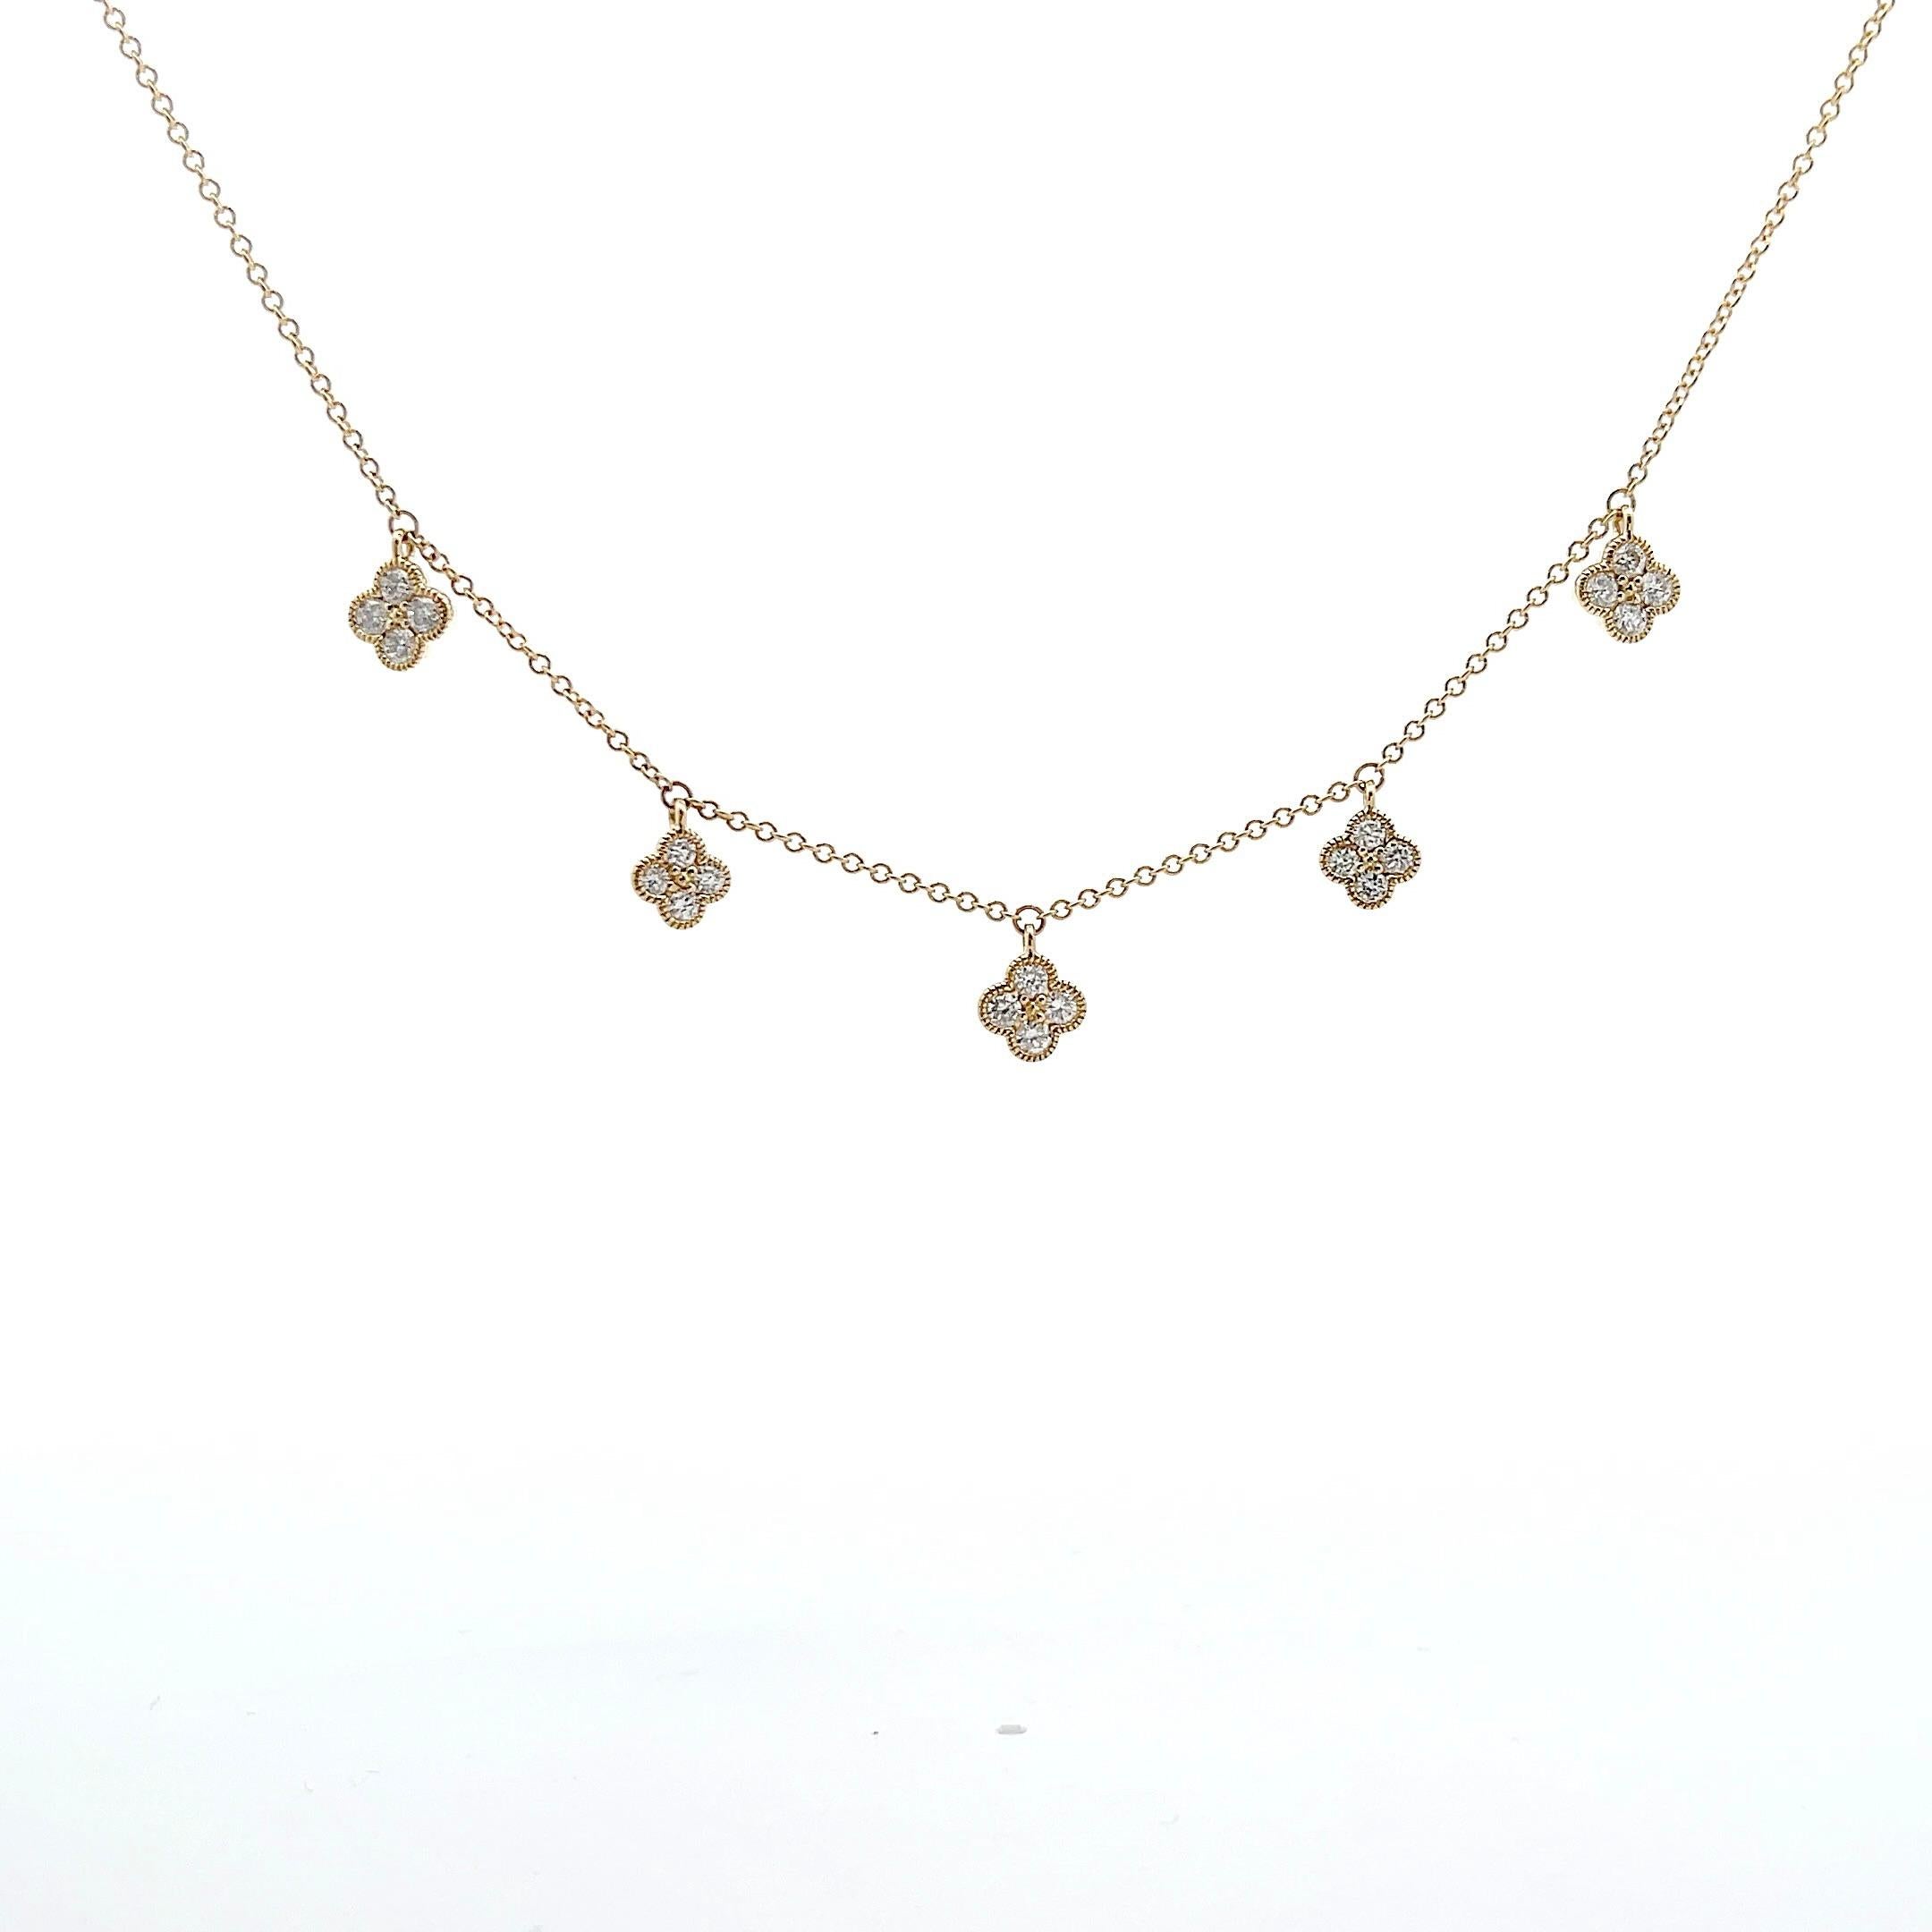 Diamond flower 5 station necklace set with 20 round brilliant cut diamonds weighing 0.78 carats in 18K yellow gold. Necklace is 18